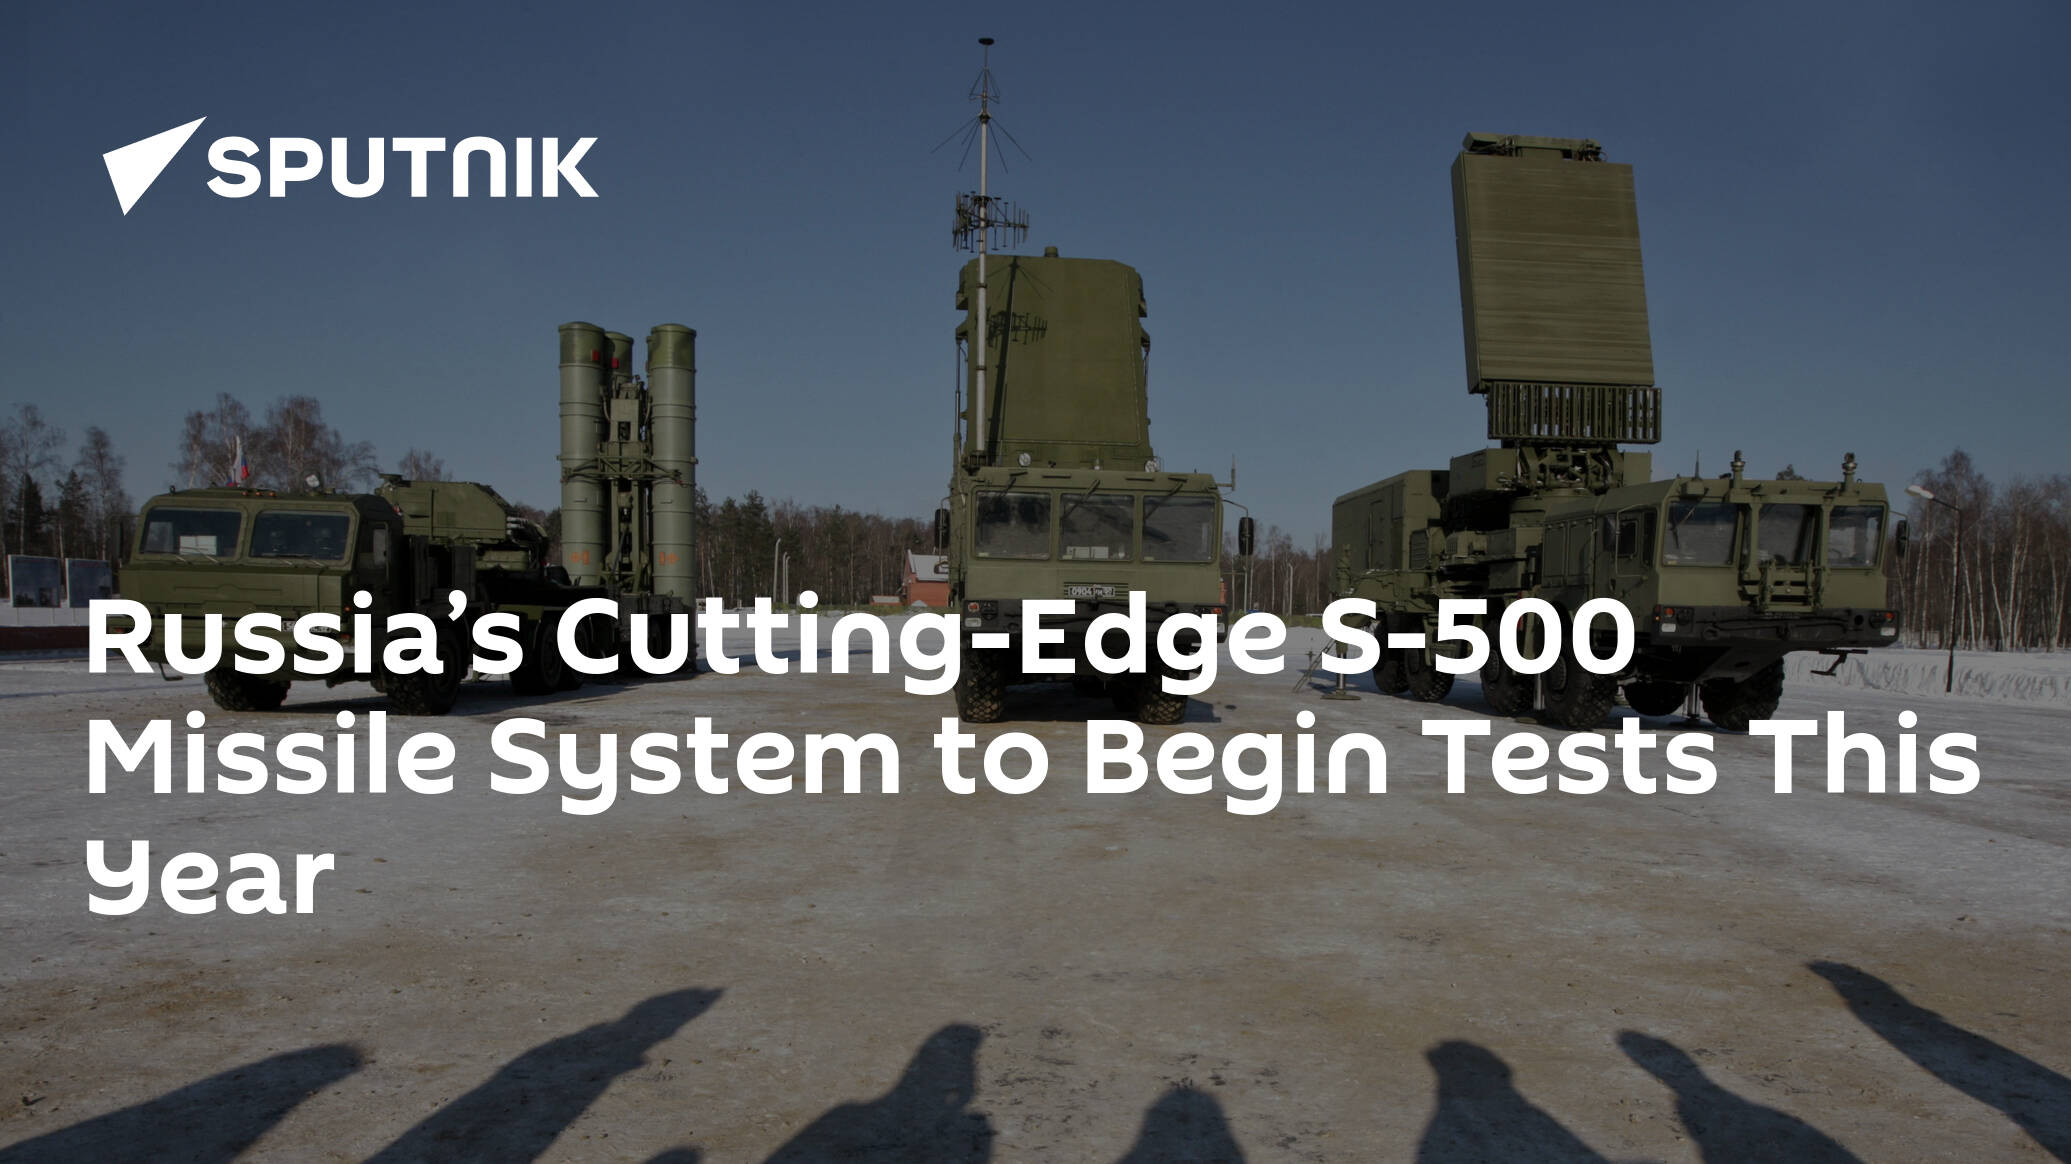 Russia’s Cutting-Edge S-500 Missile System to Begin Tests This Year ...